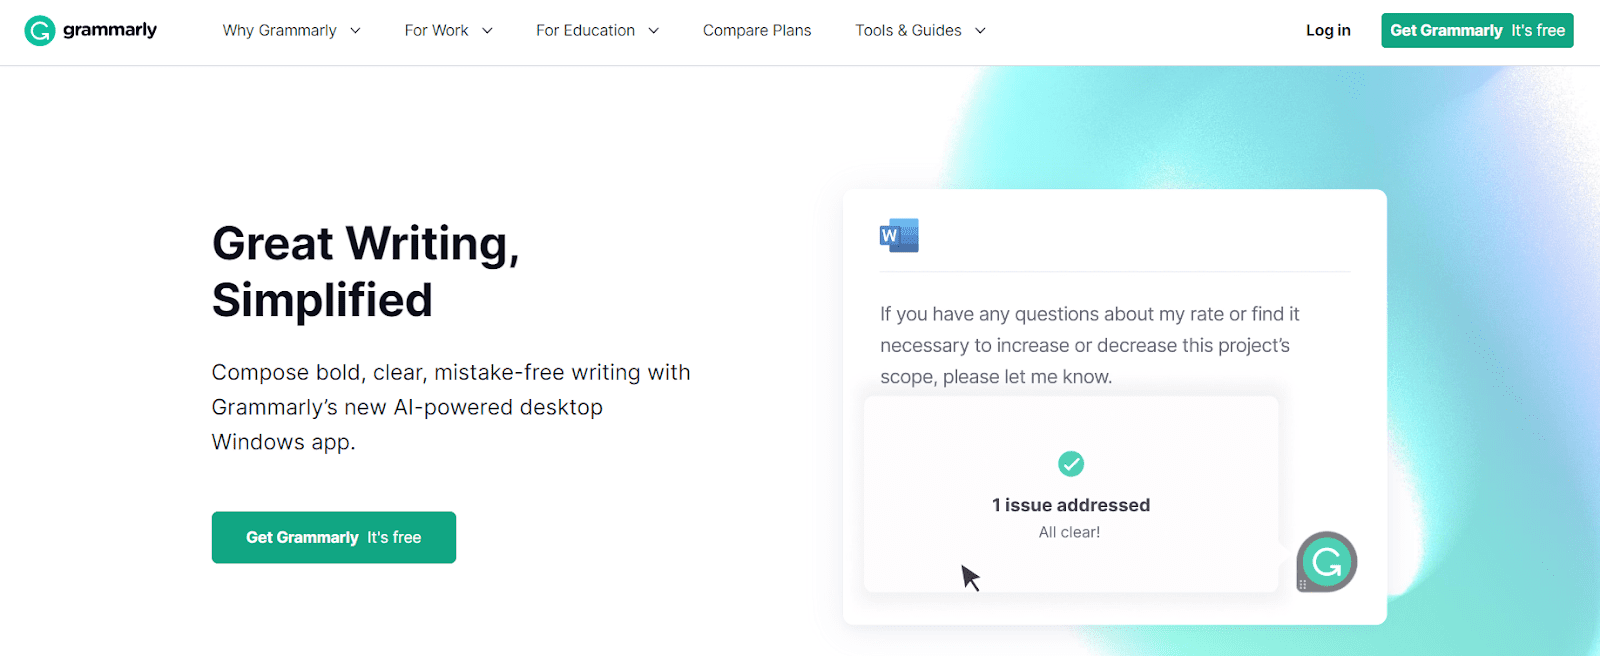 Homepage section of Grammarly tool showing us how we can check grammar errors in our content.